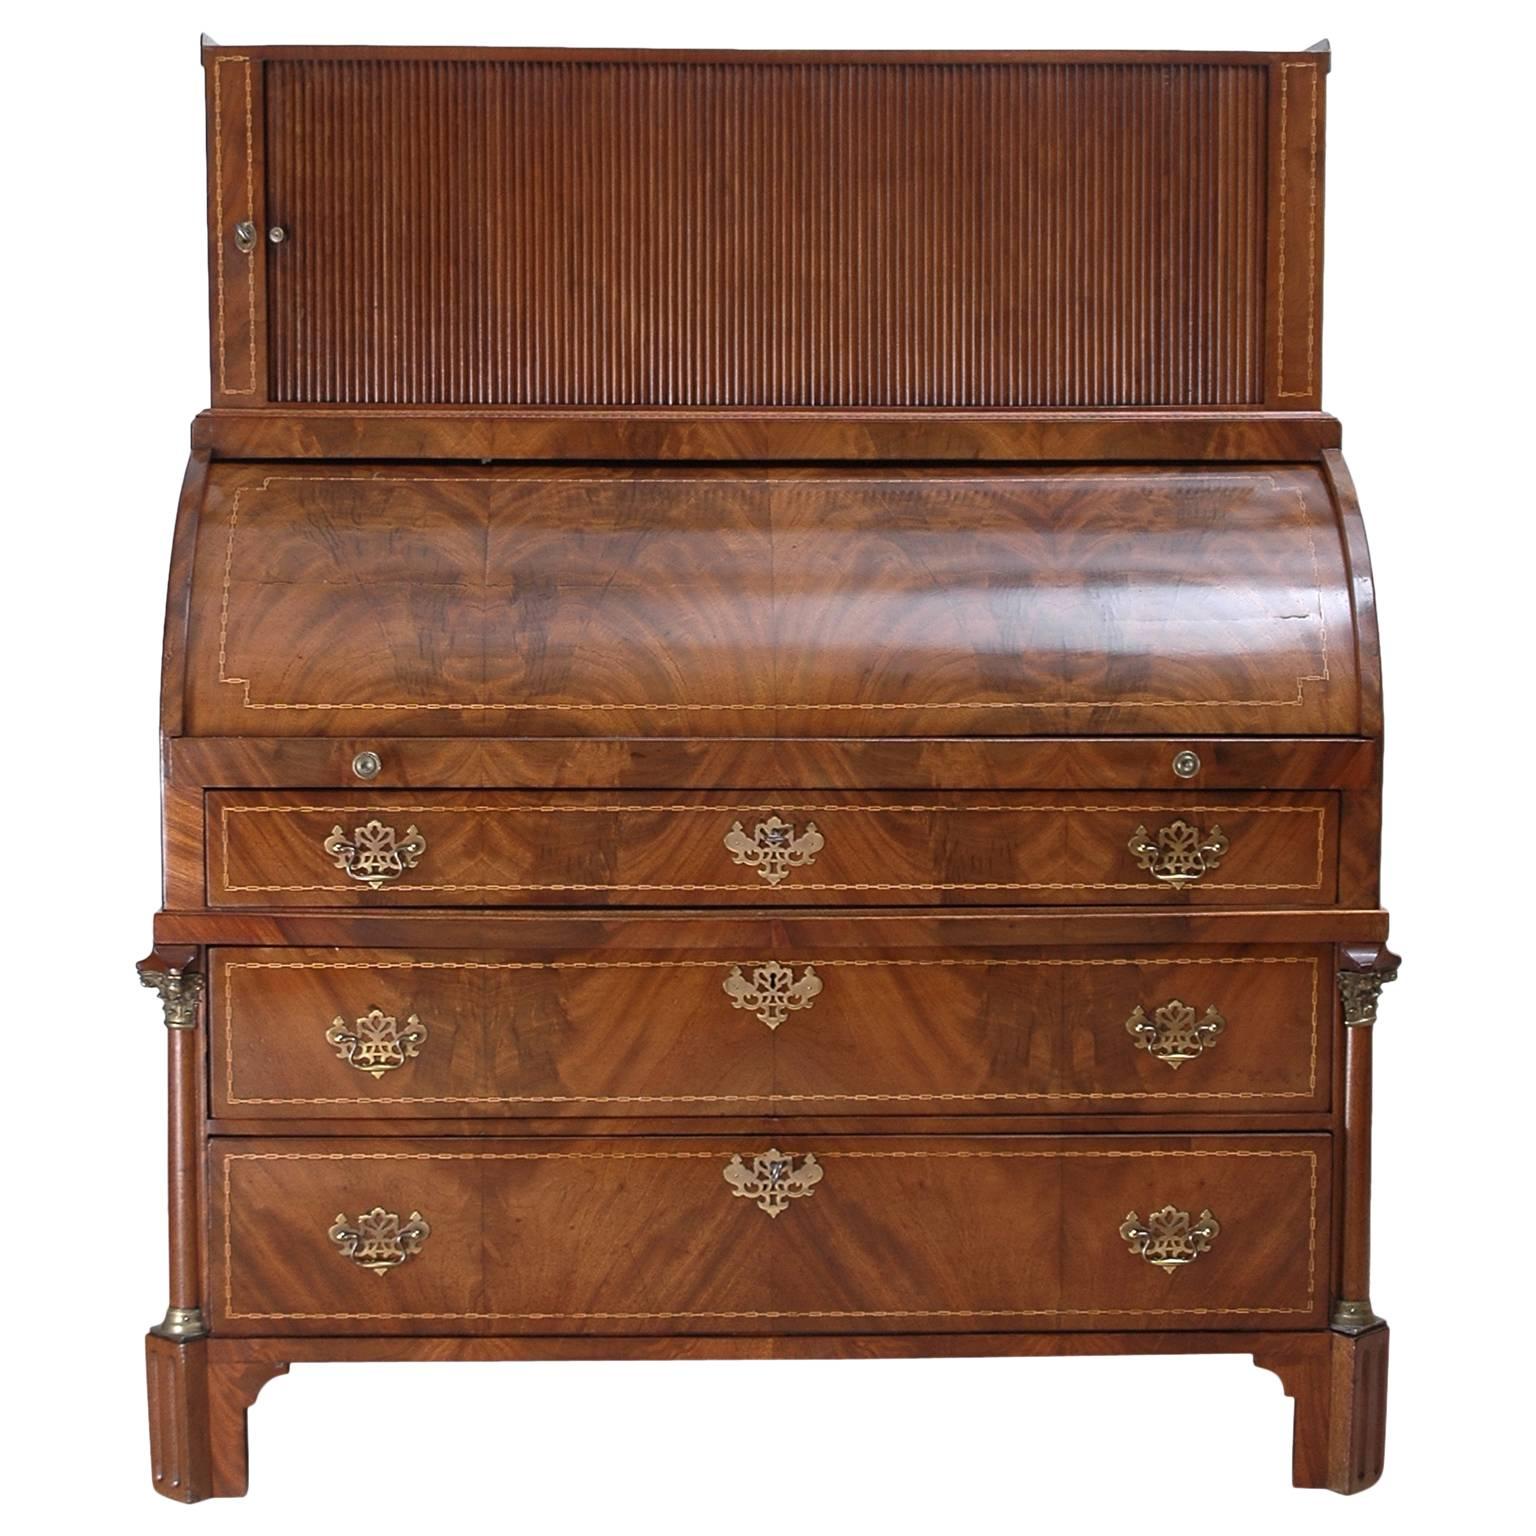 A Louis XVI secretary desk in mahogany with satinwood inlays. Offers a cylinder top that opens to reveal a series of small drawers surrounding a closed cubby by pulling on the writing surface by way of two brass pulls. Above desk top is a tambour